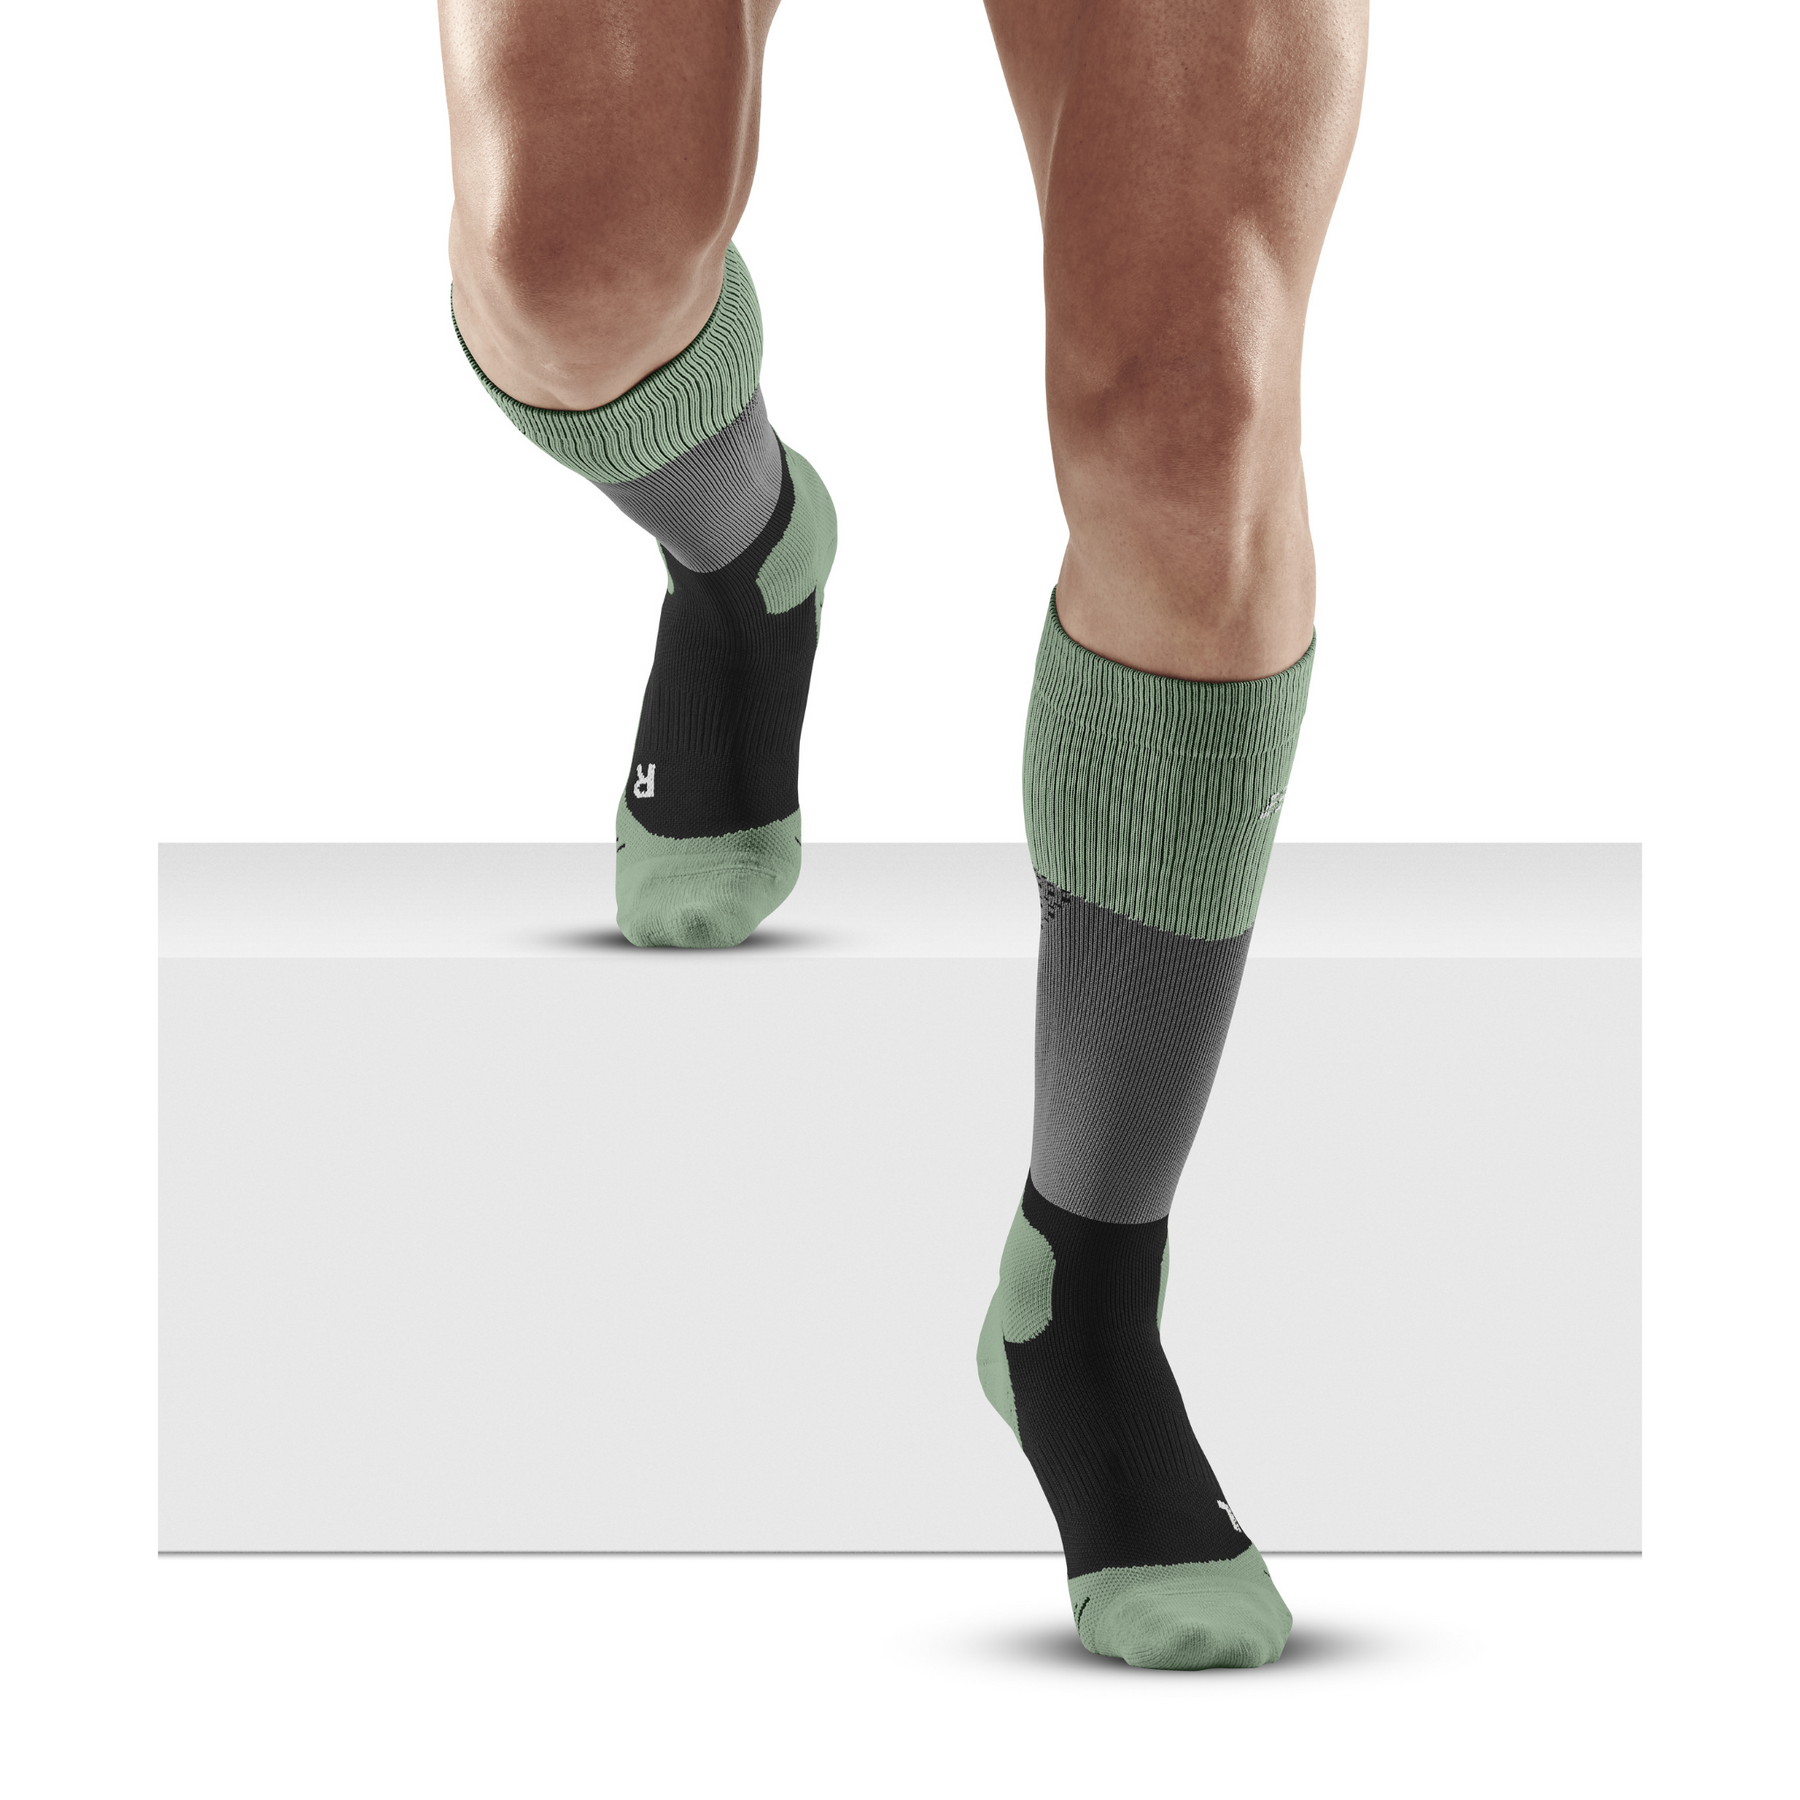 Compression socks - why and when?